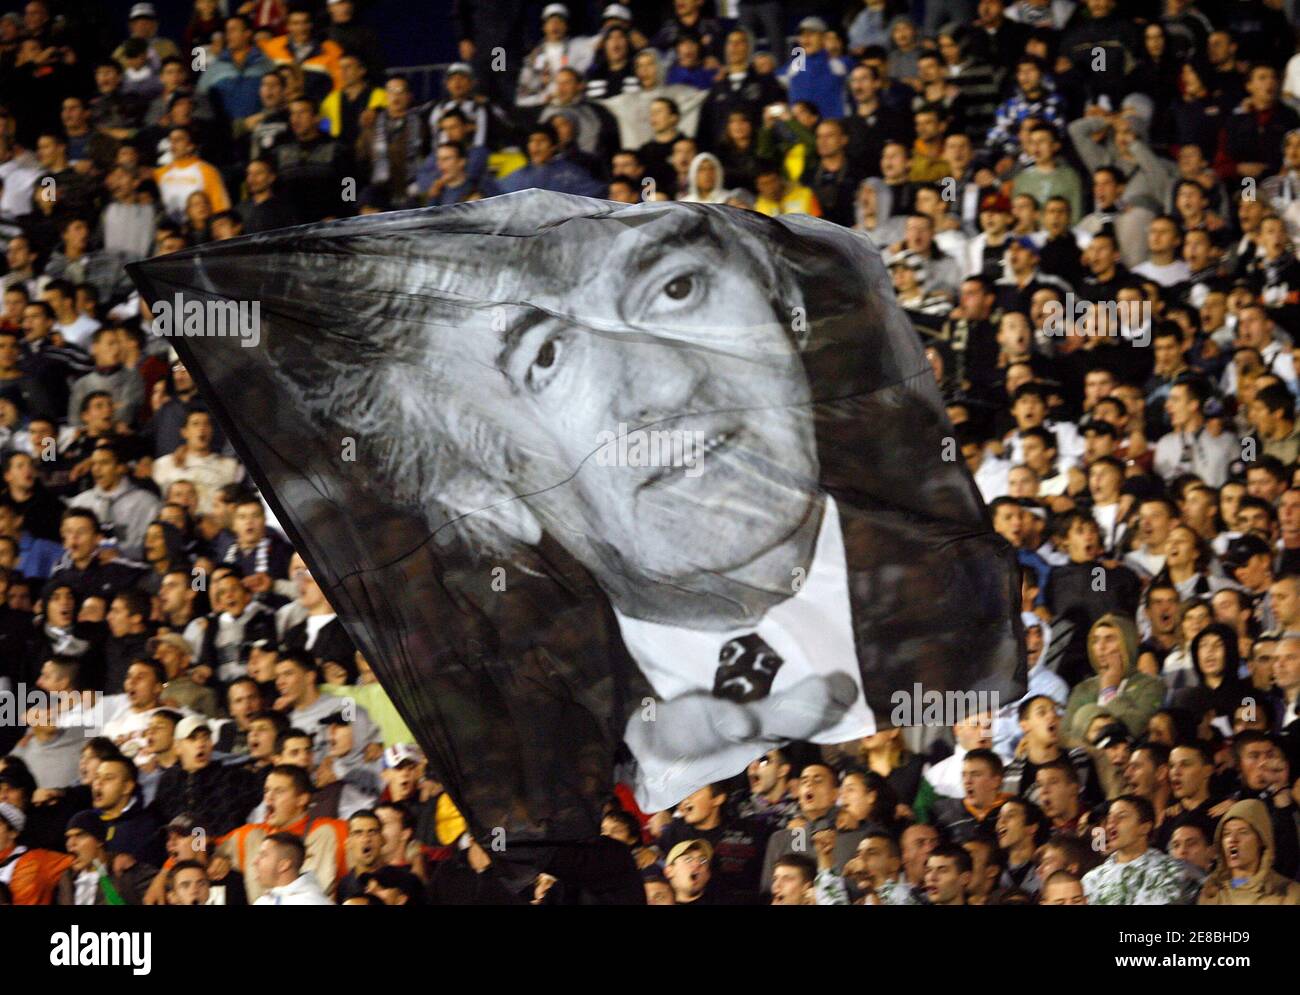 Supporters of Partizan Belgrade wave flag with Radovan Karadzic's picture during friendly soccer match against Olympique Lyonnais in Belgrade July 23, 2008.   REUTERS/Ivan Milutinovic (SERBIA)  BEST QUALITY AVAILABLE Stock Photo